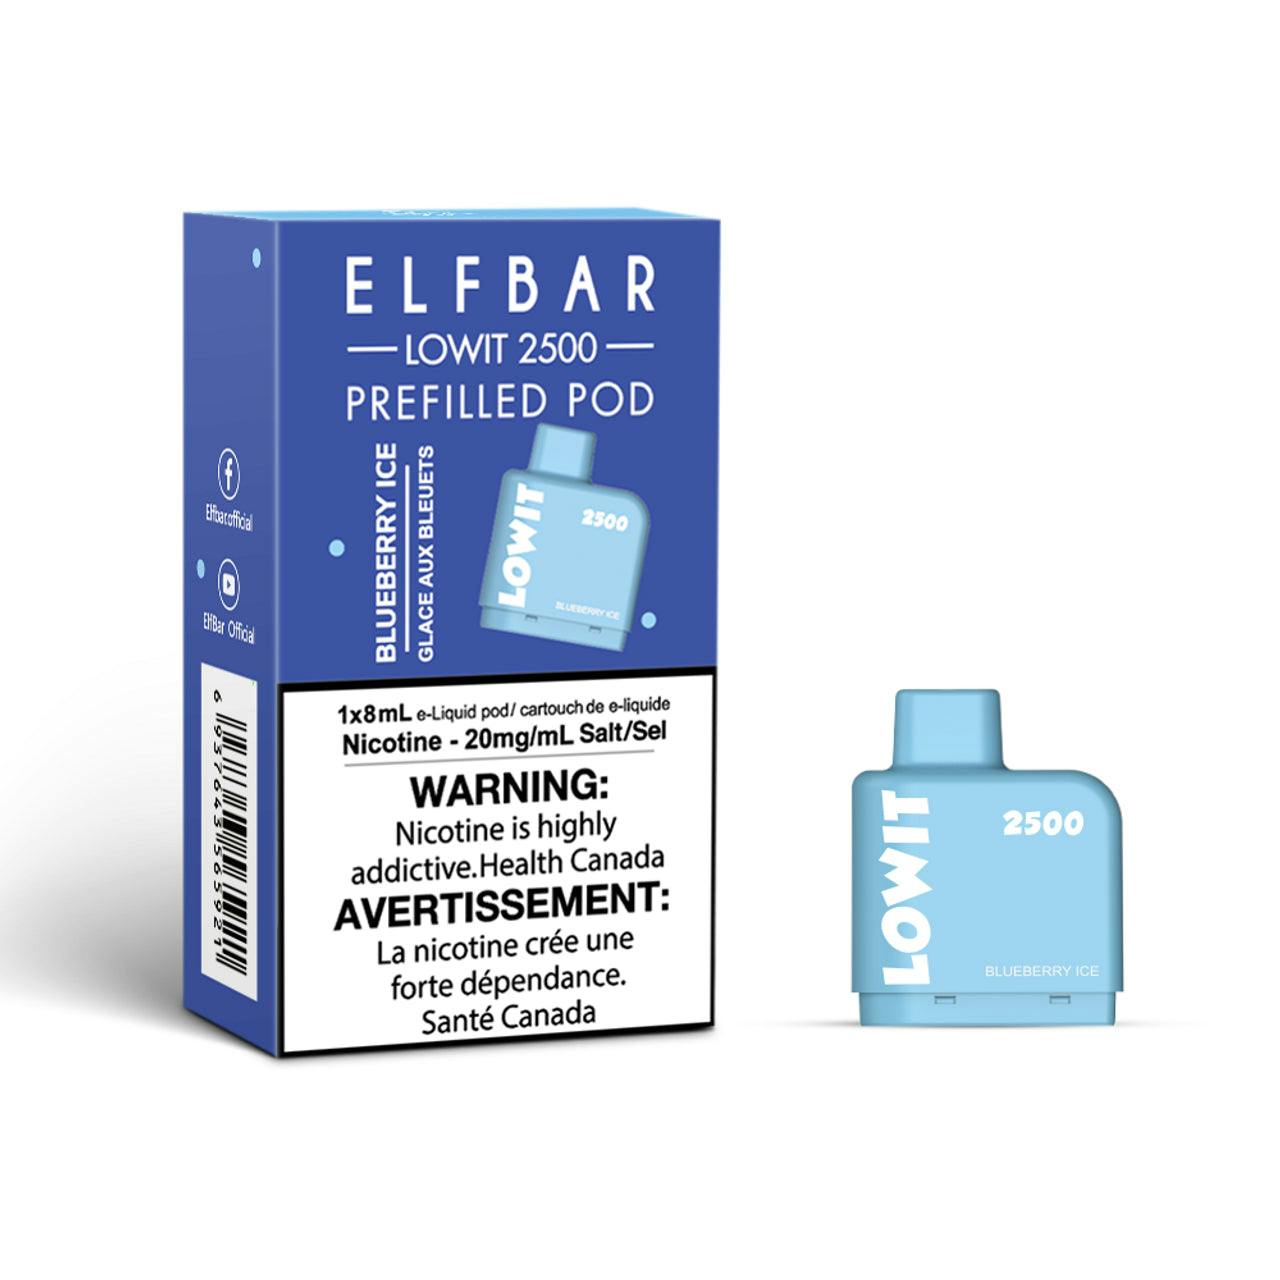 Elf Bar Lowit 2500 Puff Prefilled Pod - 10ct - Excise Version-undefined | For sale Jubilee Distributors